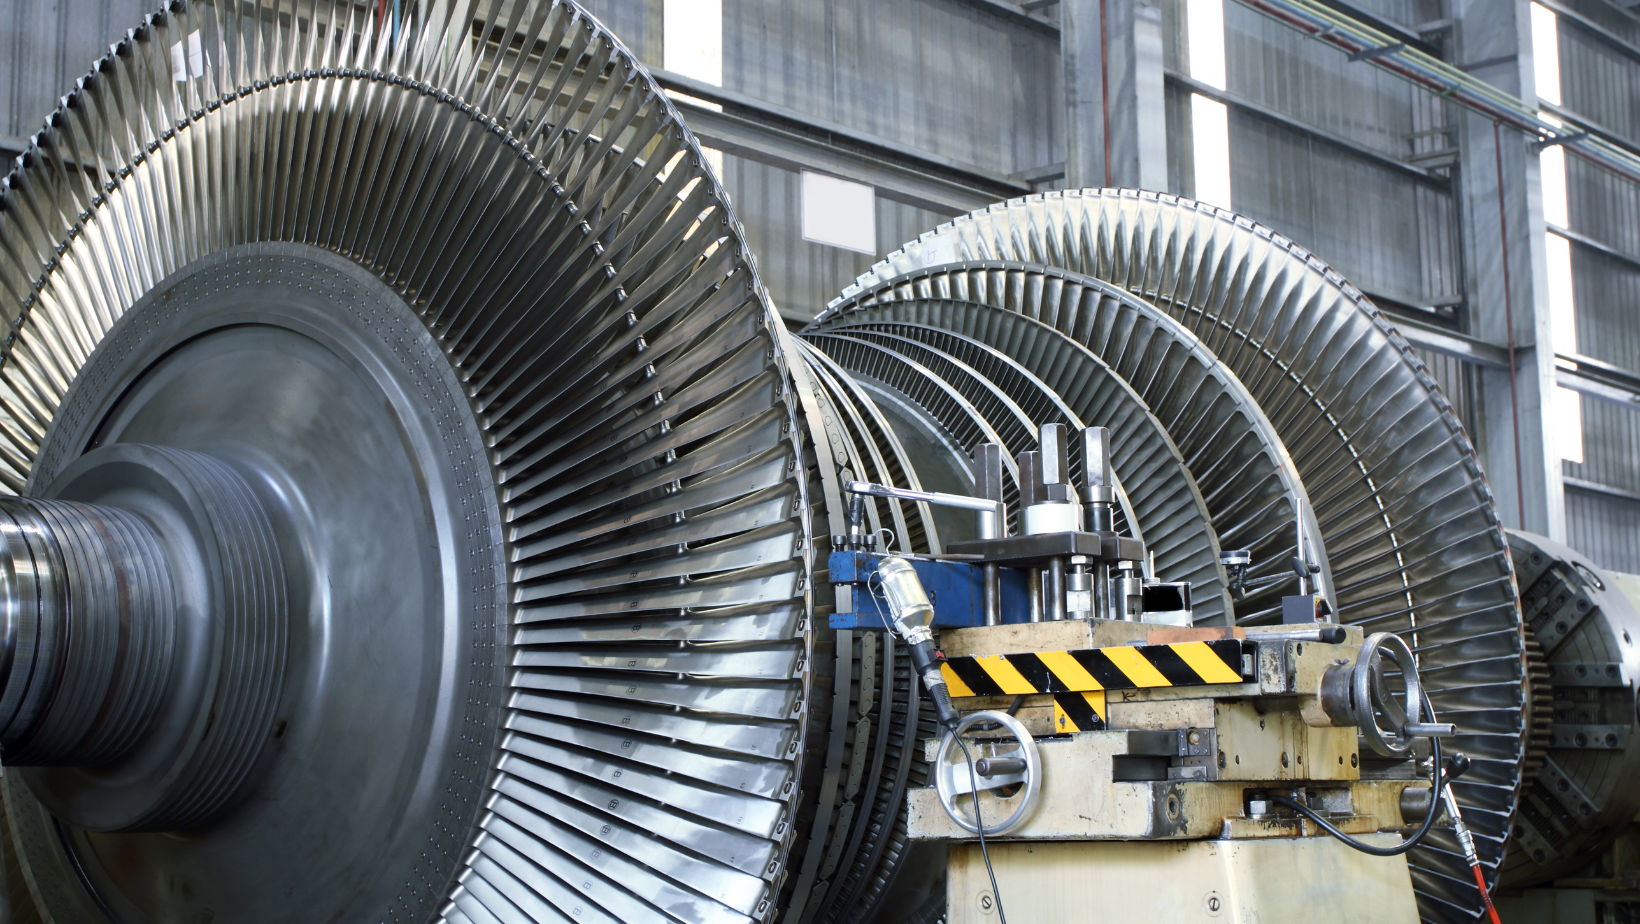 Steam Turbines in Cogeneration Systems